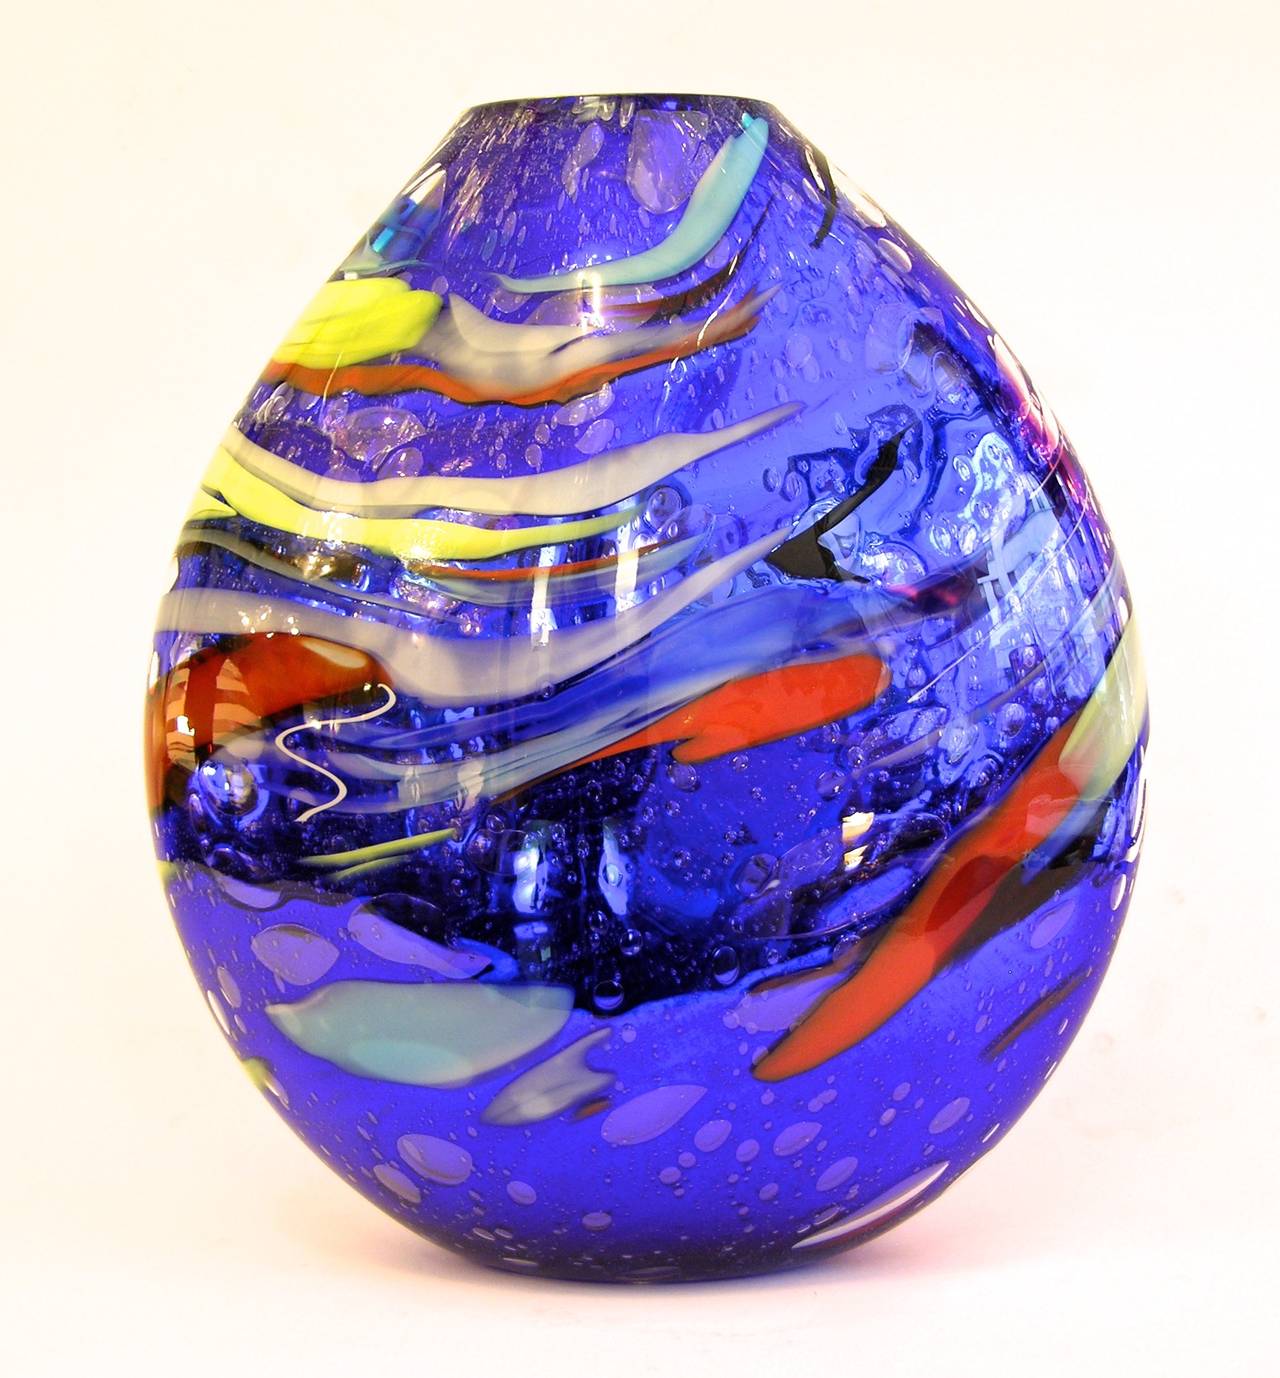 Italian Murano glass vase, contemporary Work of Art signed by Davide Dona.
The shape is unusual: ovoid and angled; the mouth blown execution is extraordinary. The very innovative decoration is achieved with a sophisticated blue overlaid in clear